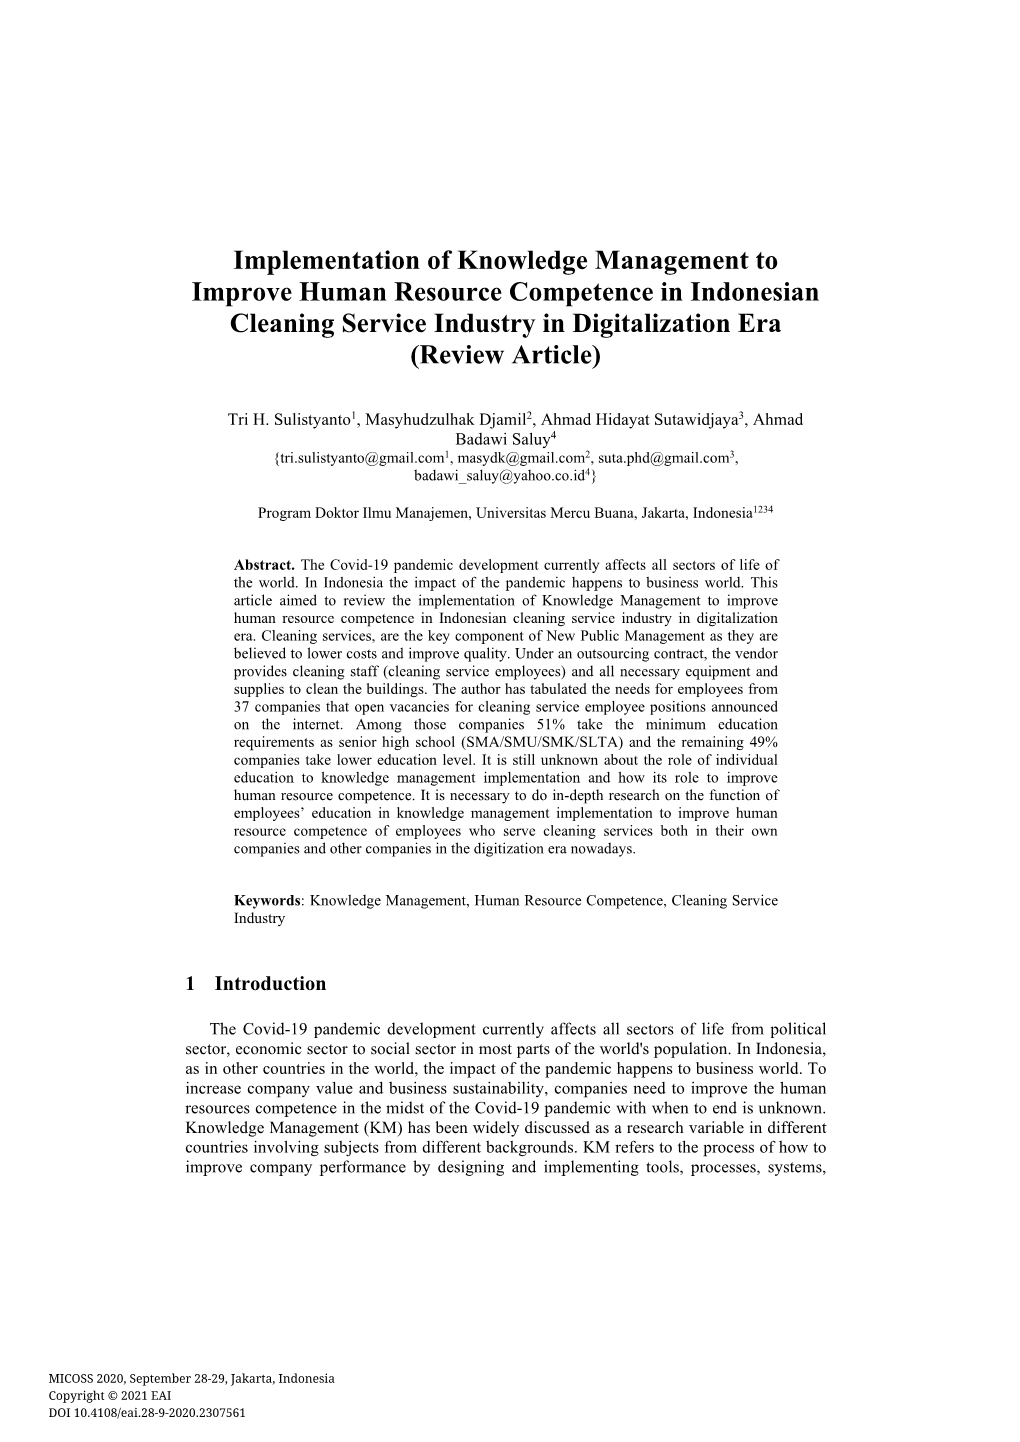 Implementation of Knowledge Management to Improve Human Resource Competence in Indonesian Cleaning Service Industry in Digitalization Era (Review Article)